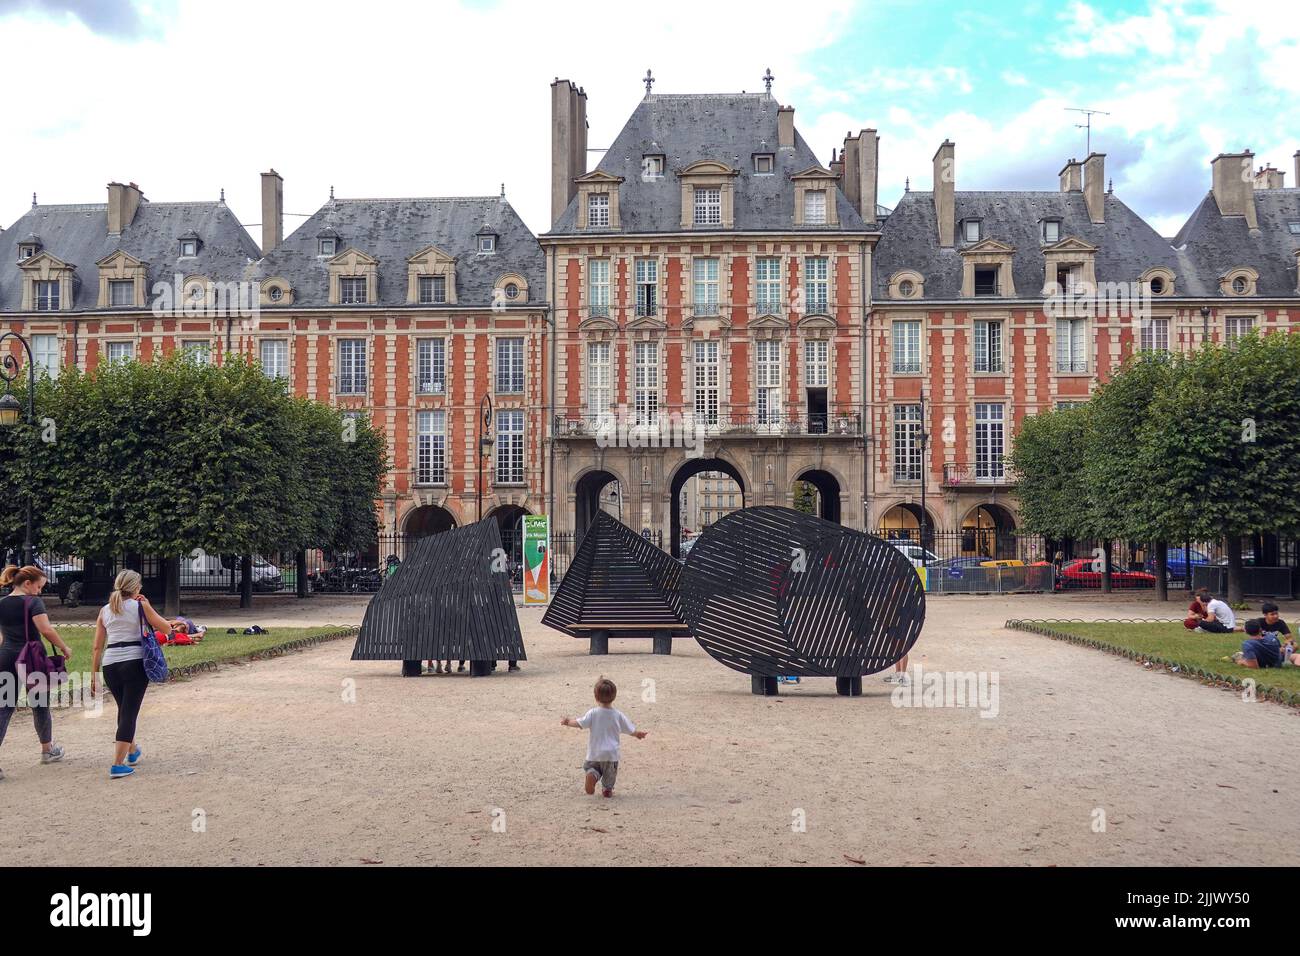 France, Paris, The Place des Vosges, originally Place Royale, is the oldest planned square in Paris, France. It is located in the Marais district, and Stock Photo